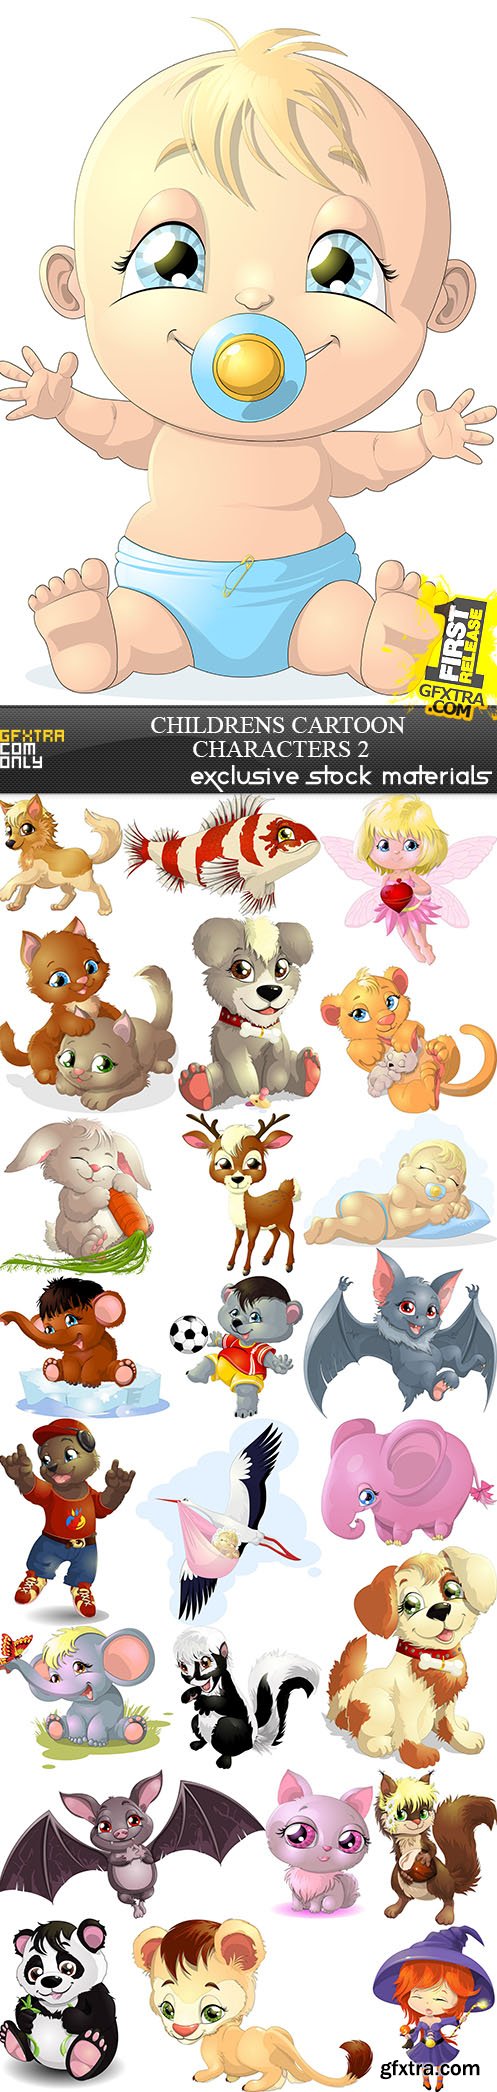 Childrens Cartoon Characters 2, 25xEPS